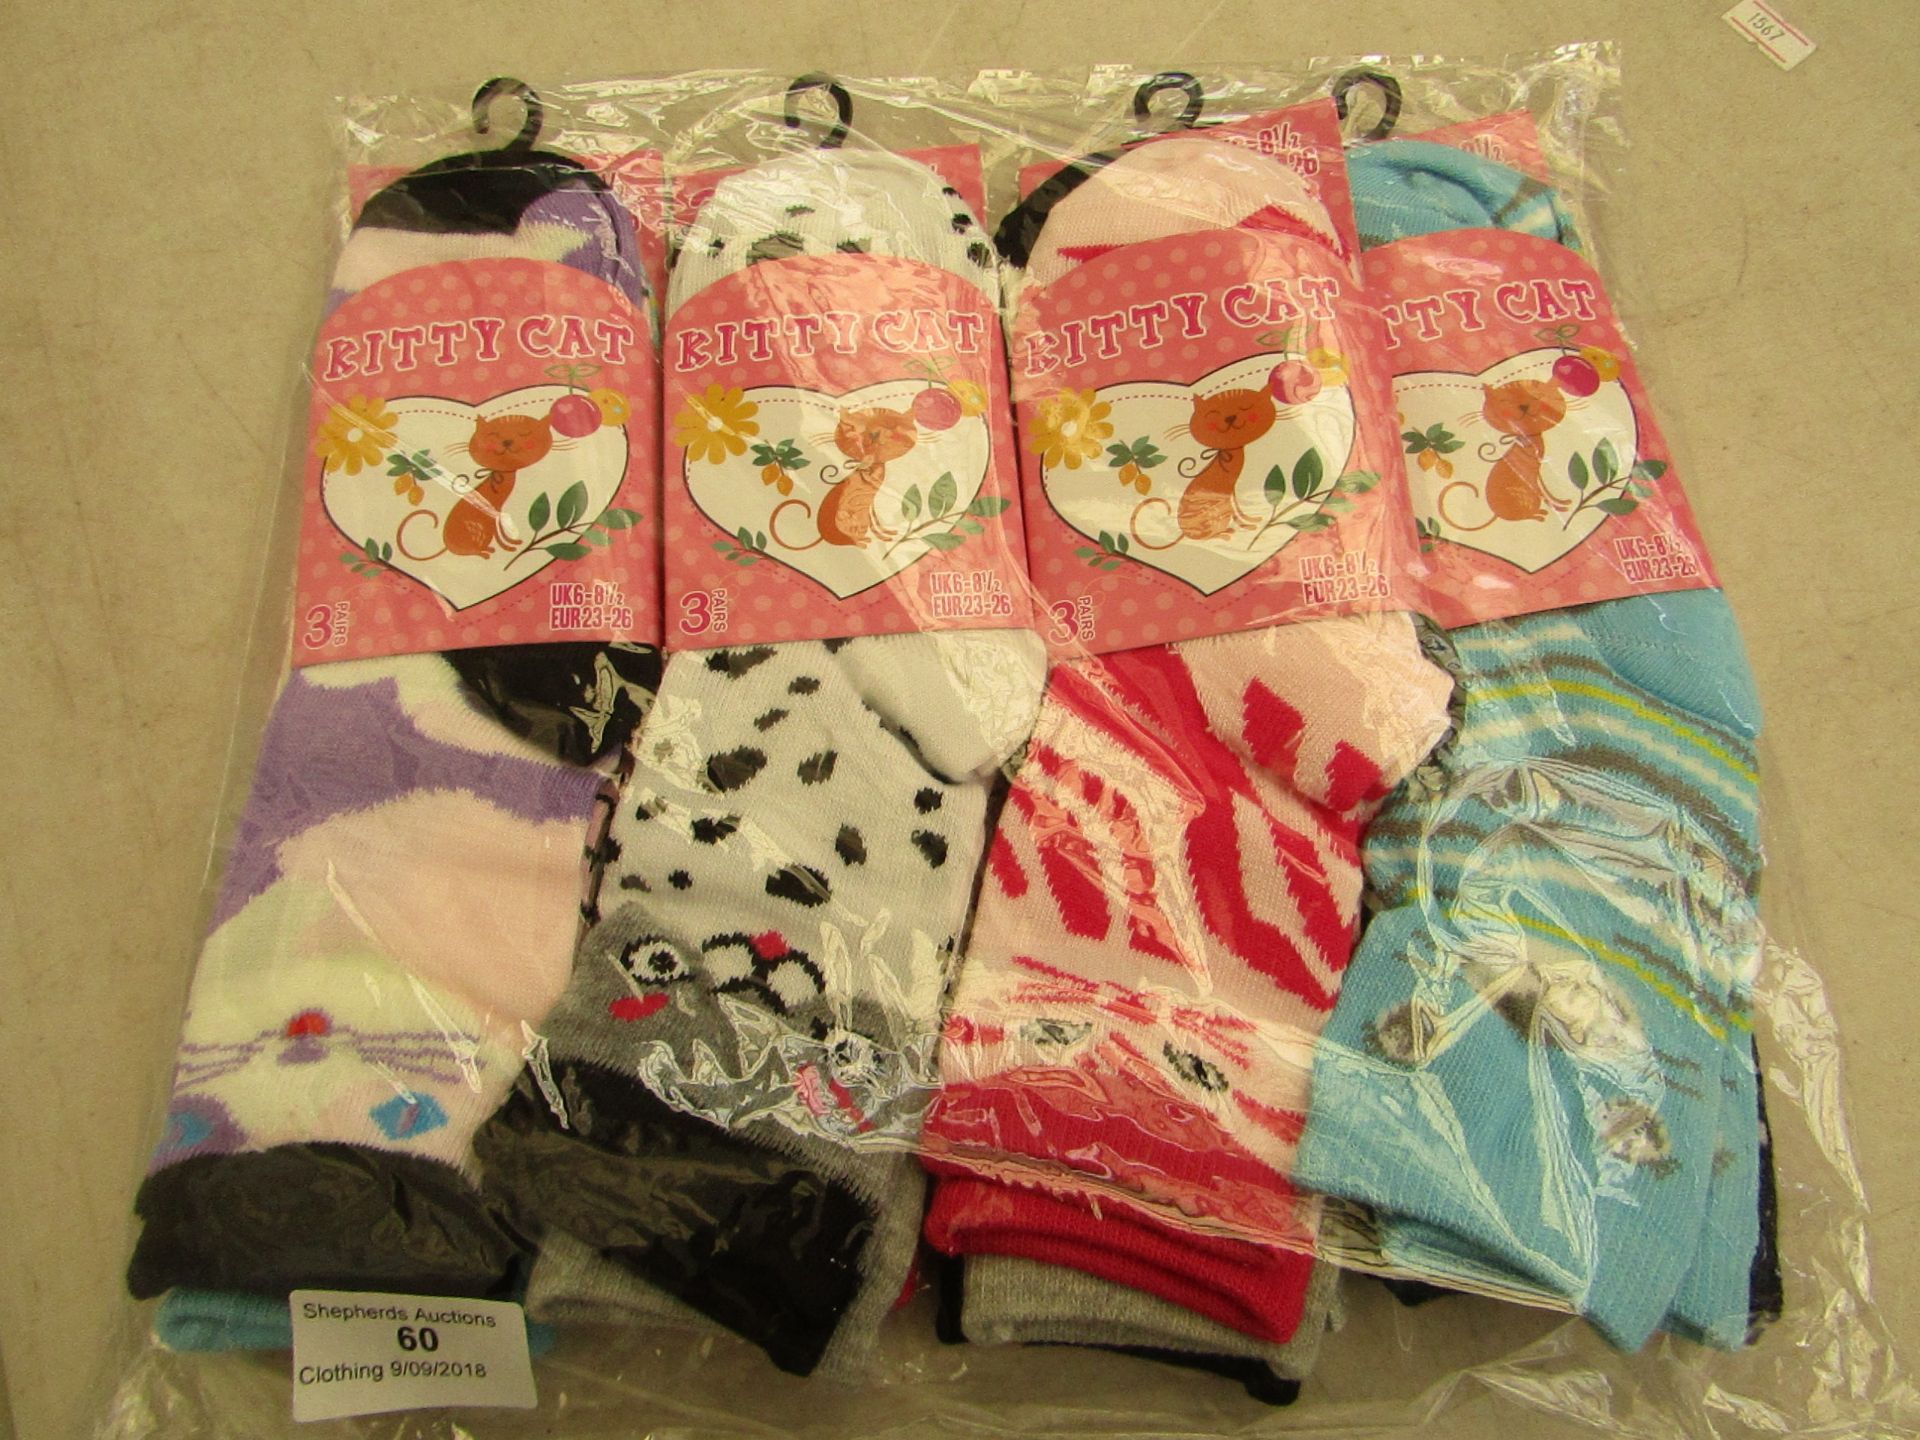 12 X Pairs of childrens socks kitty cat themed size 6-8 1/2 all new in packaging